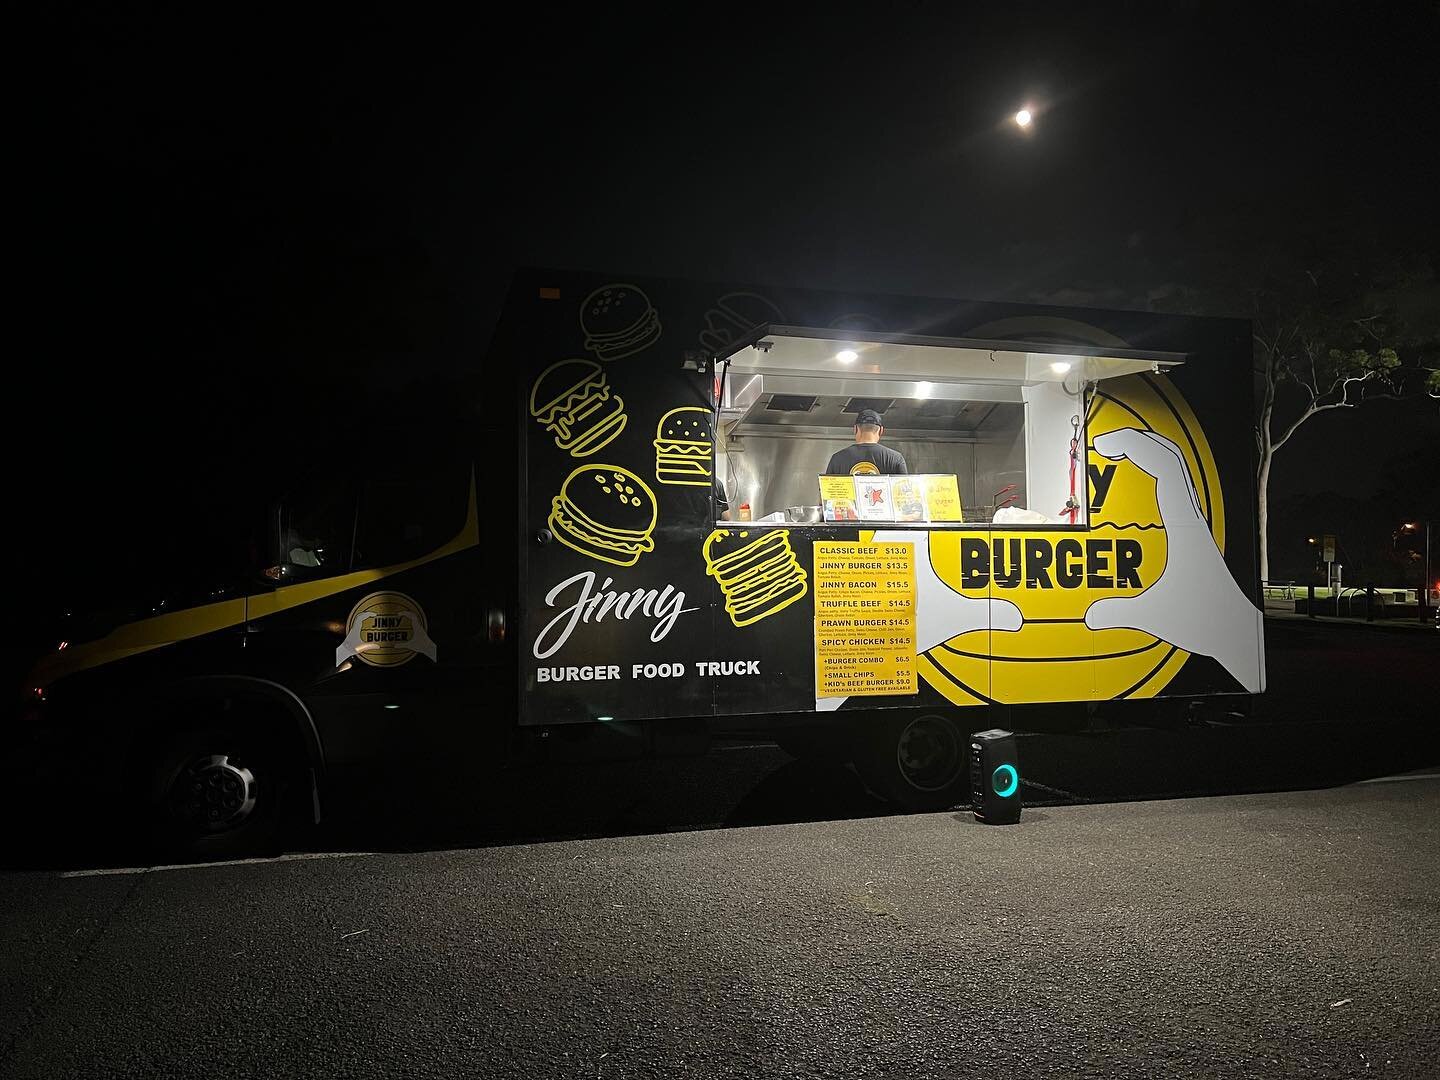 Always time for a #JinnyBurger and the moon tonight! @jinny.burger #themoon